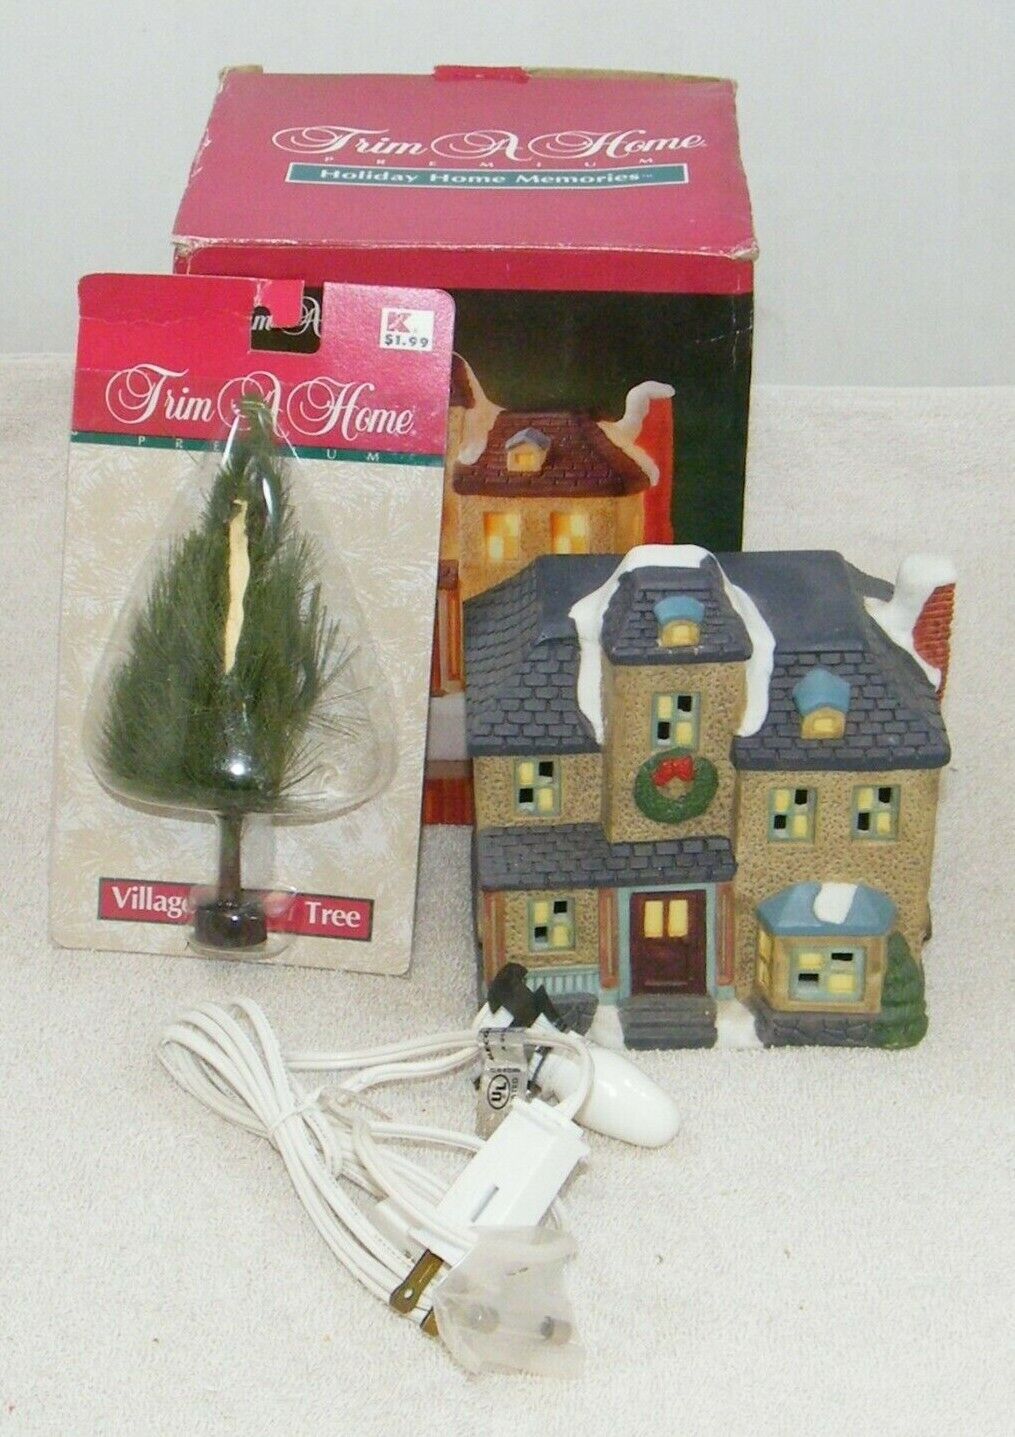 1995 TRIM A HOME HOLIDAY HOME MEMORIES HOUSE WITH TREES